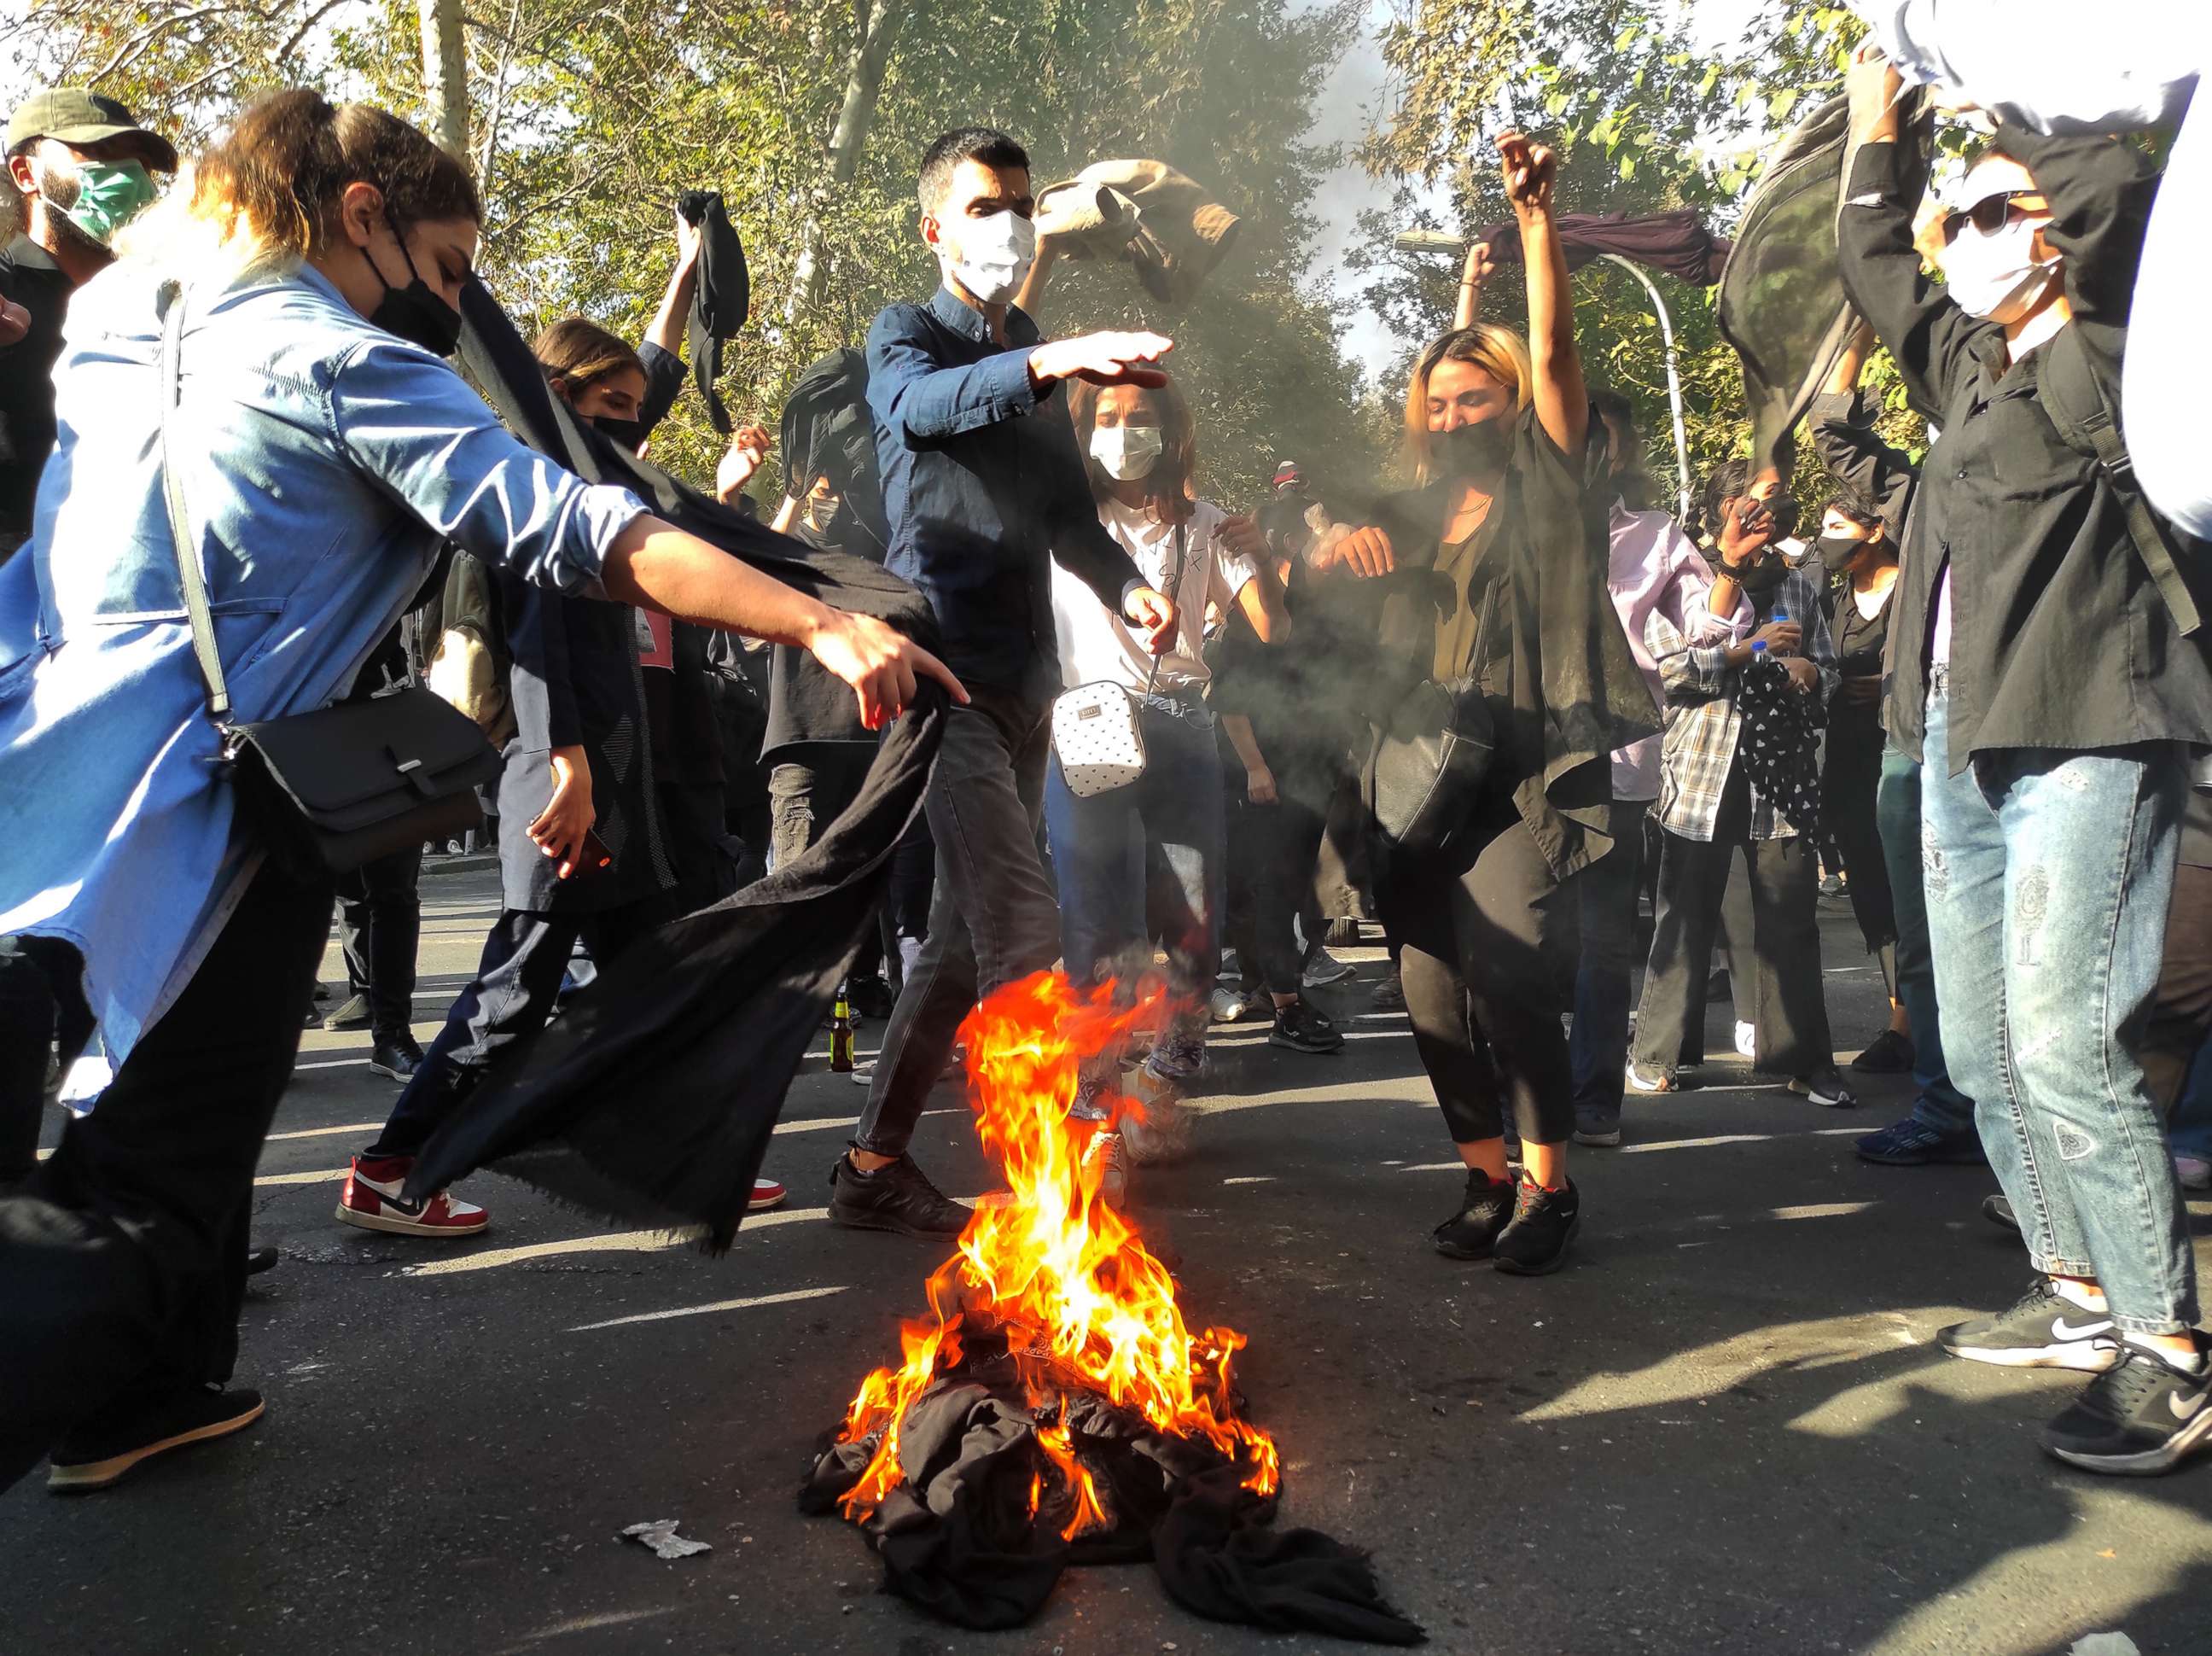 PHOTO: Iranian protesters set their scarves on fire while marching down a street in Tehran on Oct. 1, 2022.